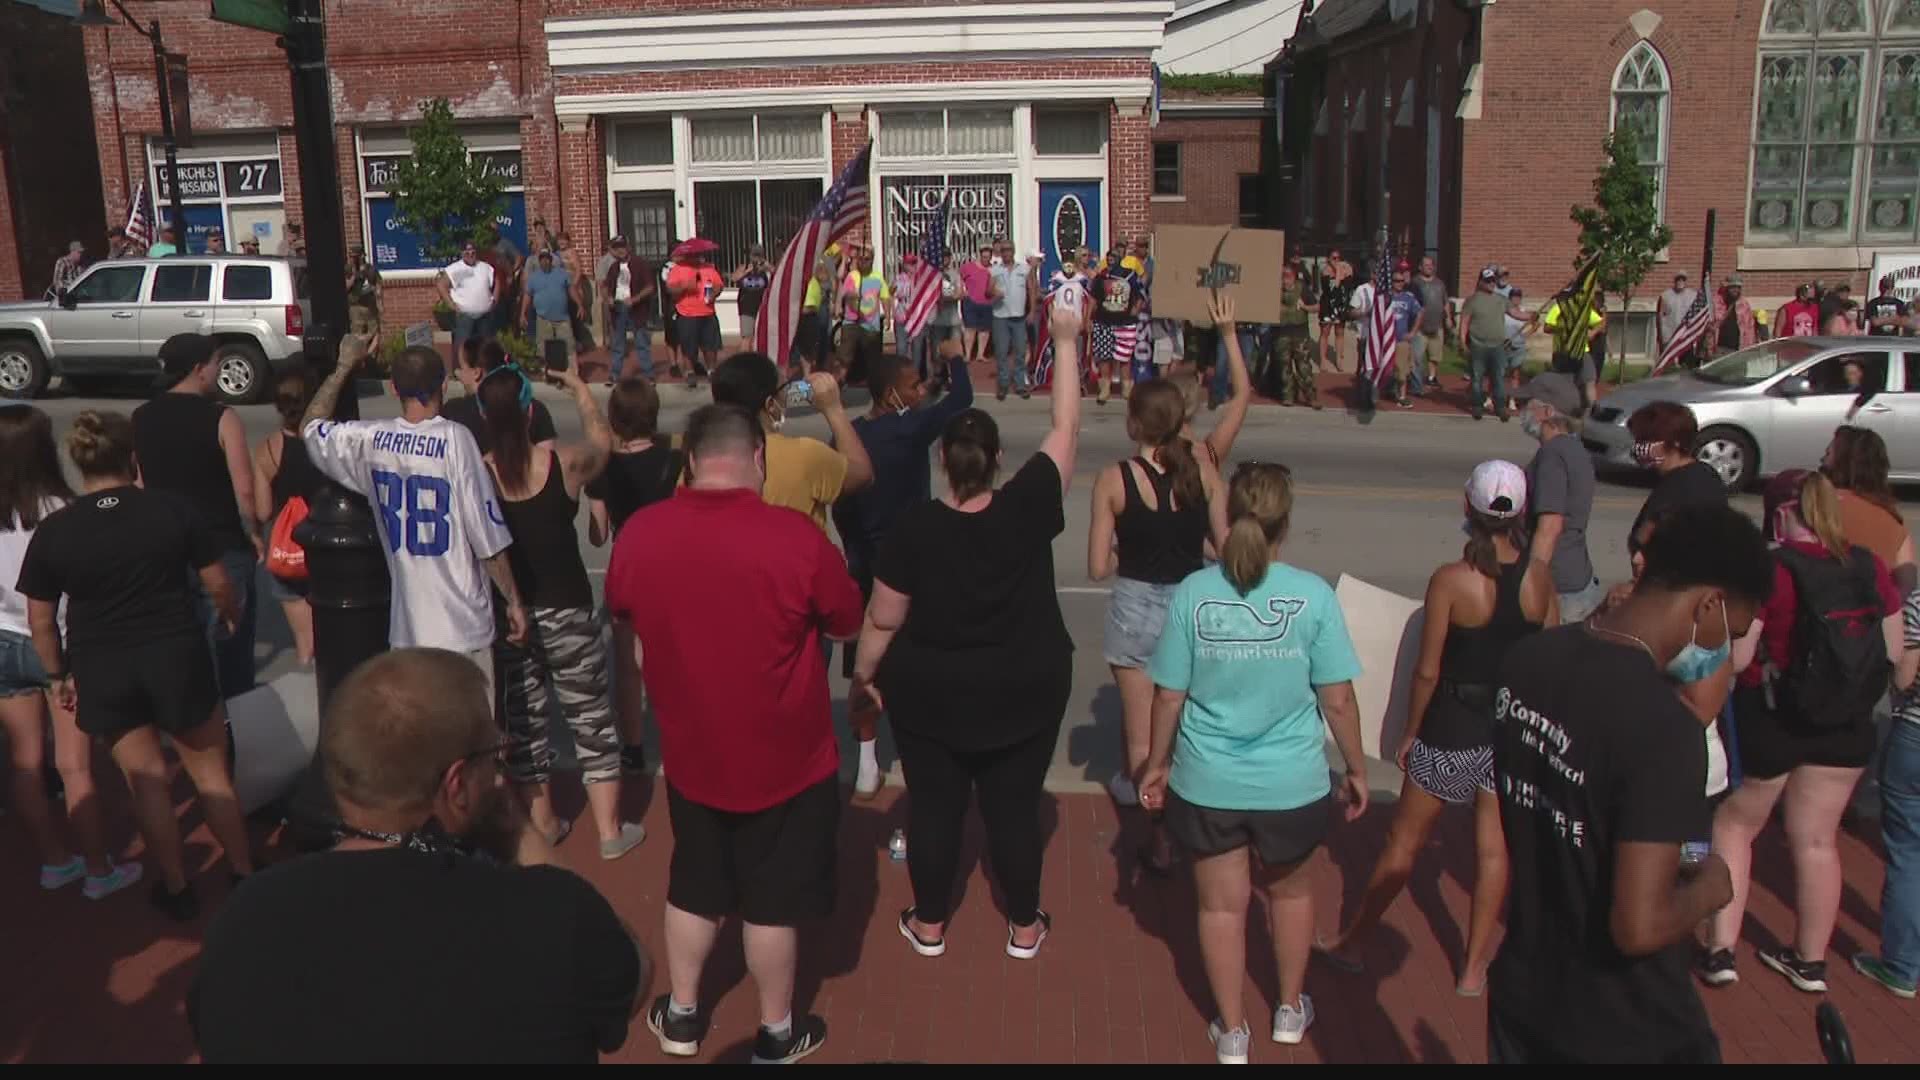 More than 100 people in support of the Black Lives Matter movement brought their message to Mooresville as part of the March on the Suburbs.